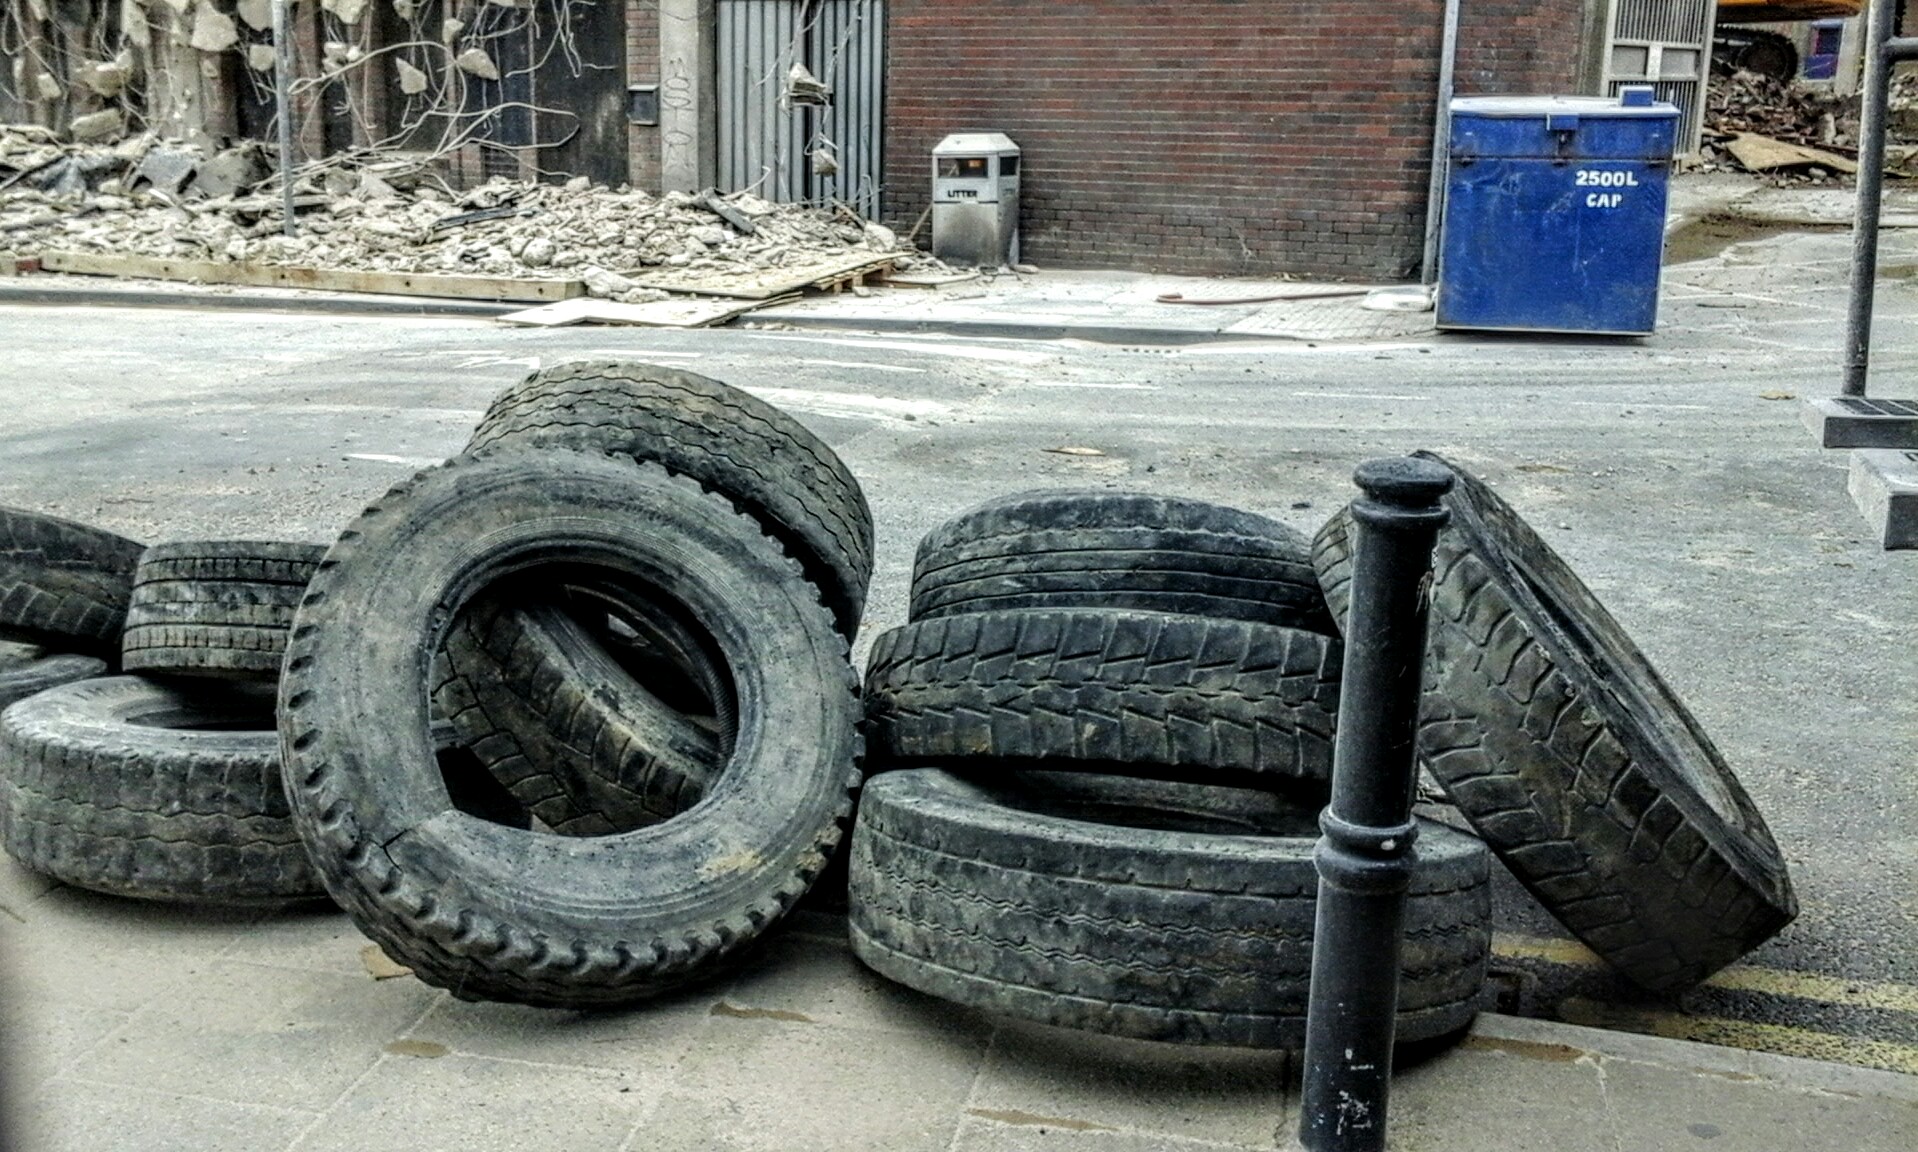 Image for Kendray Street. Where once stood buses only tyres remain.